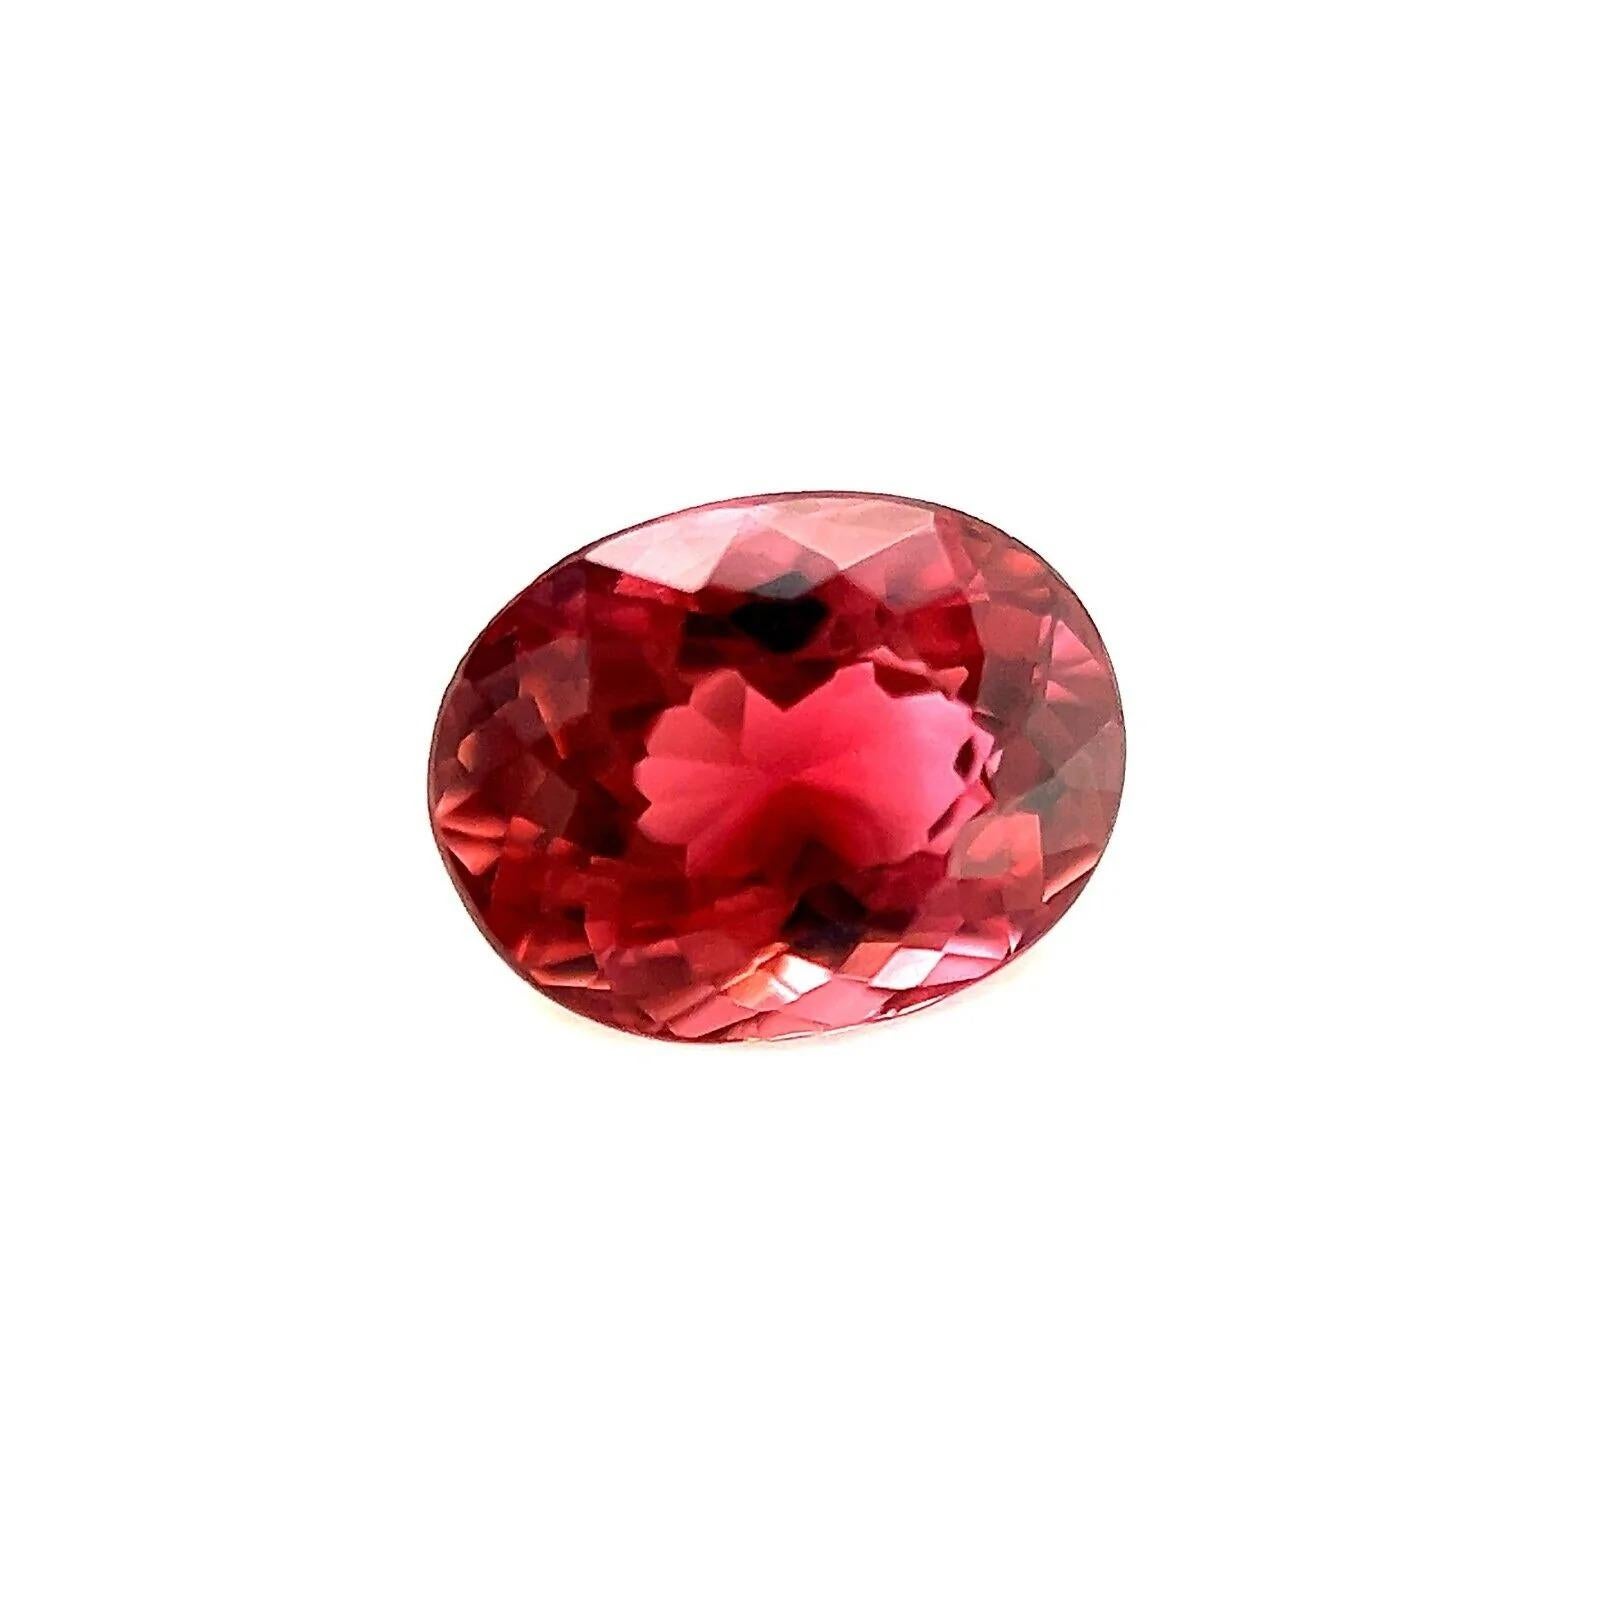 Fine 1.00ct Vivid Pink Orange Tourmaline Oval Cut Loose Gem 7x5.4mm

Fine Pink Purple Tourmaline Gemstone.
1.00 Carat with a beautiful vivid pink purple colour and good clarity. Also has a very good oval cut with good proportions and symmetry. Shows